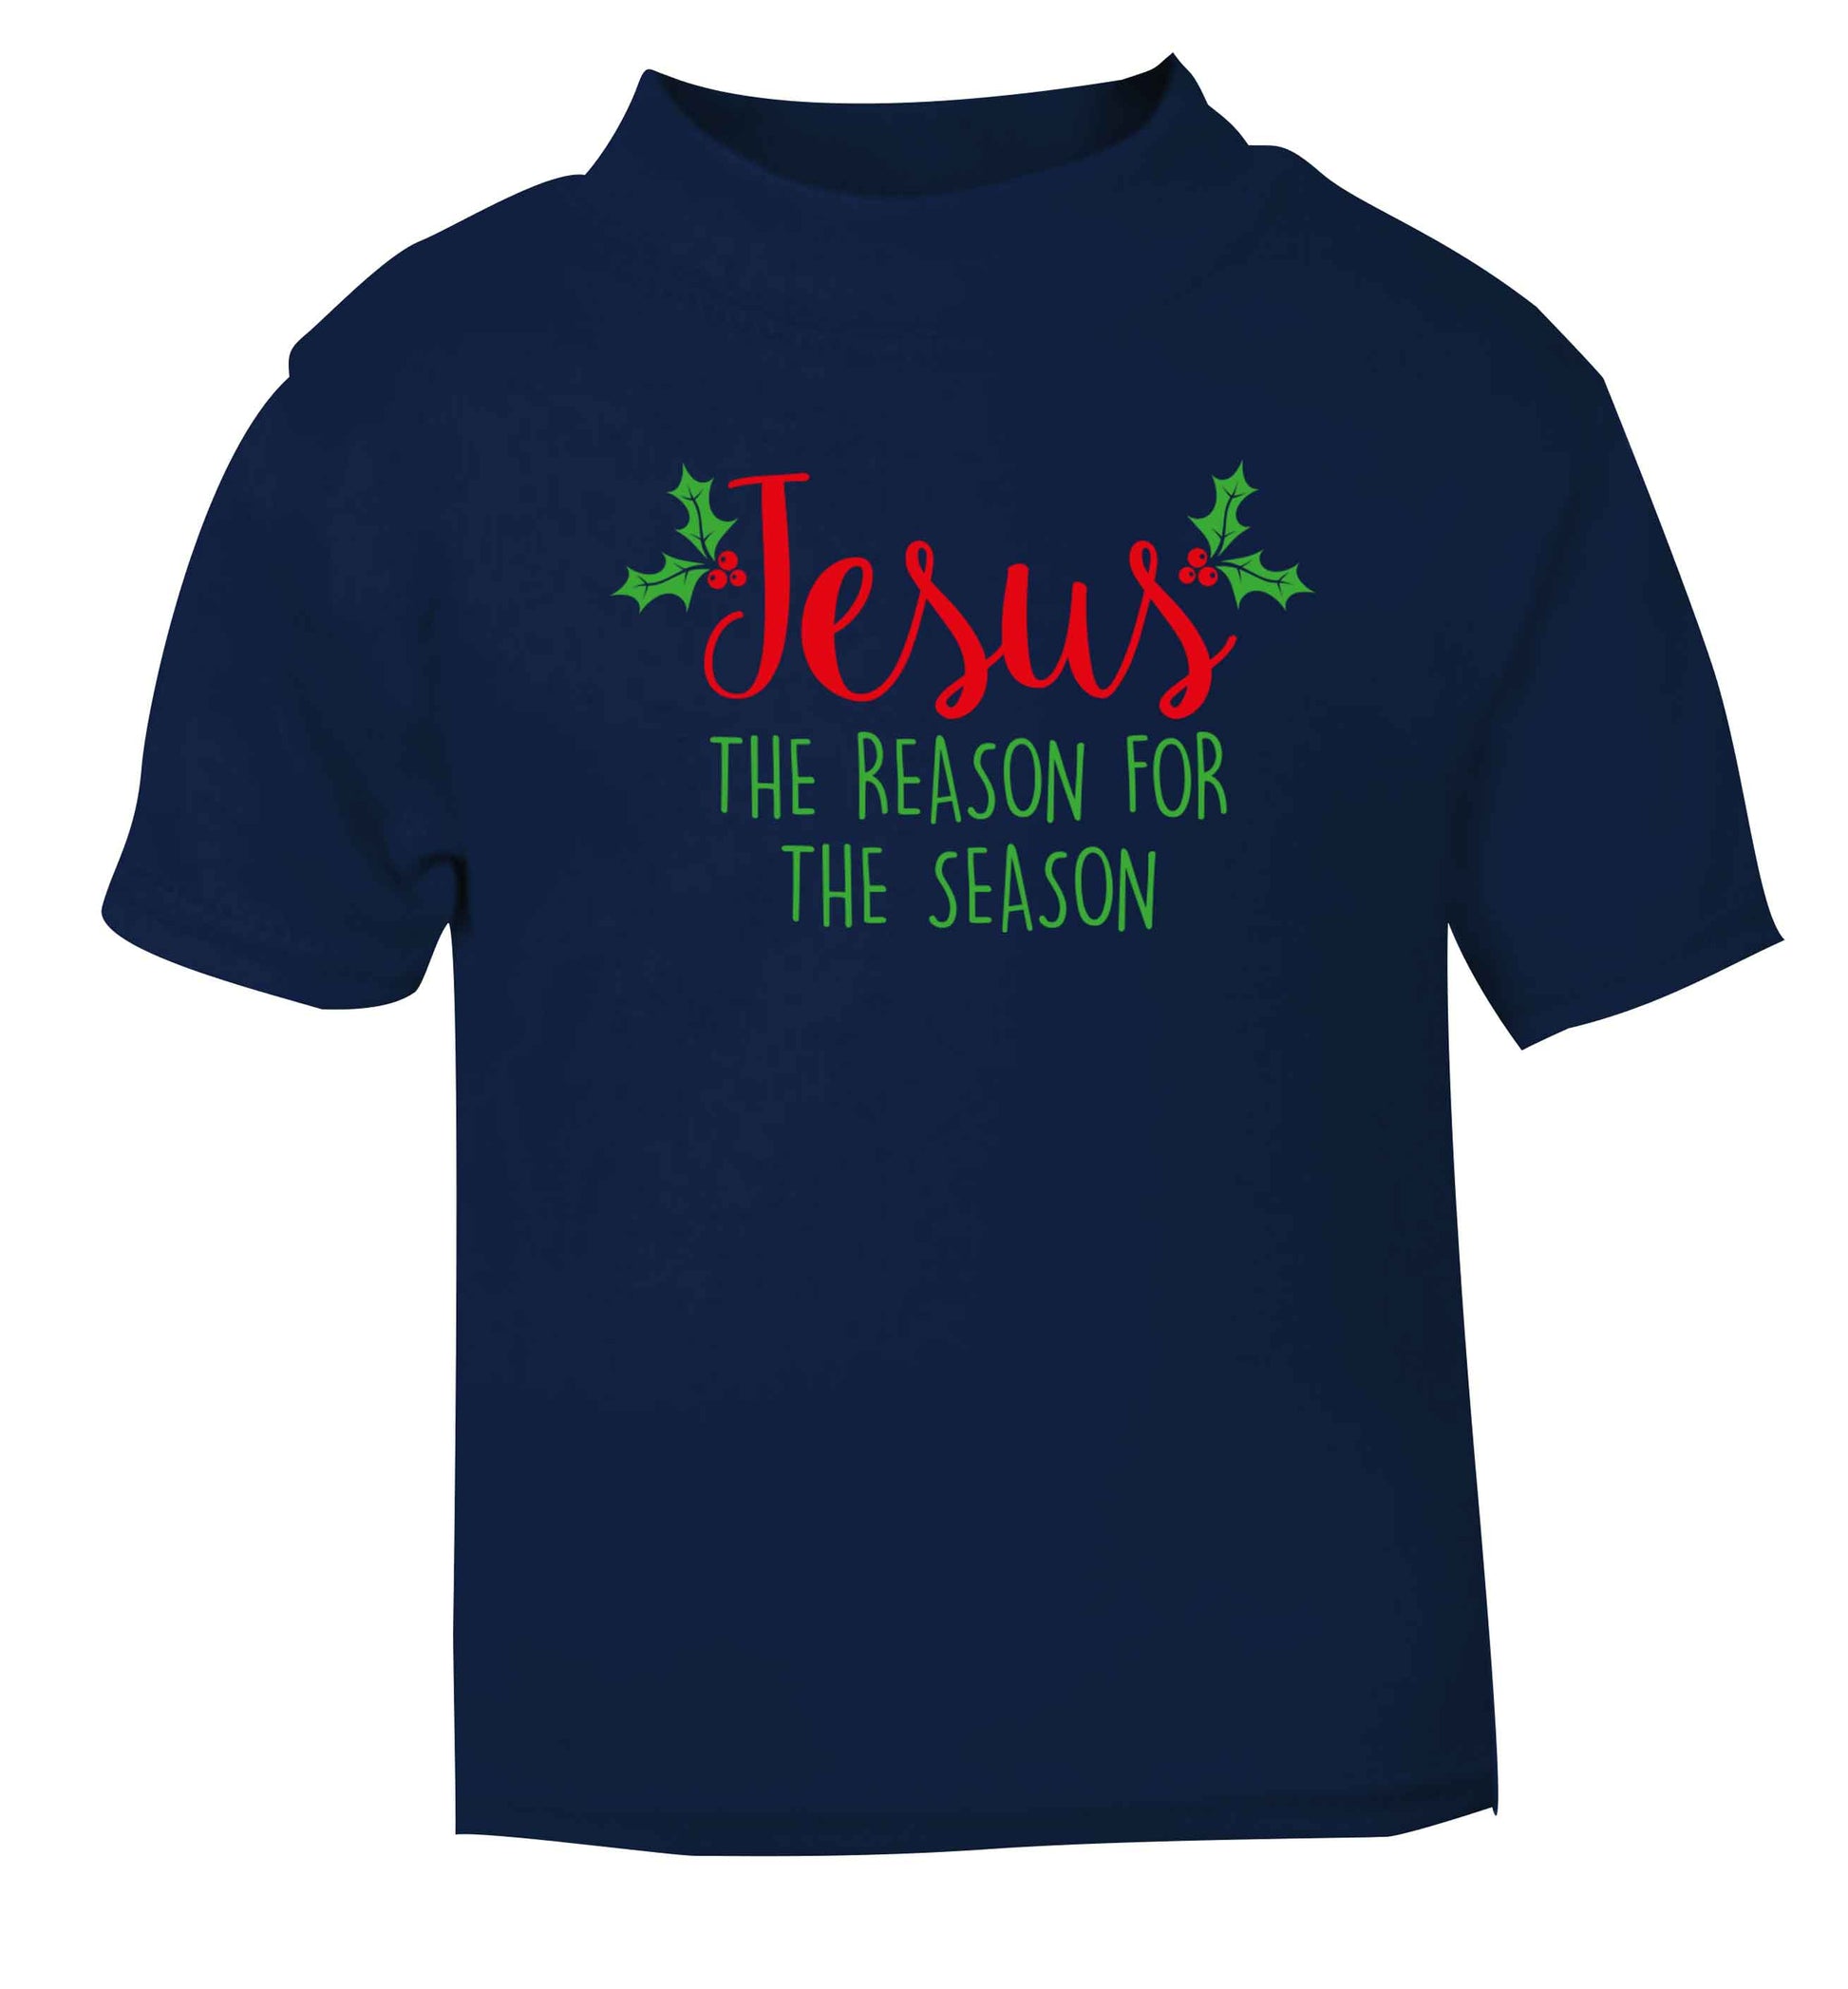 Jesus the reason for the season navy baby toddler Tshirt 2 Years